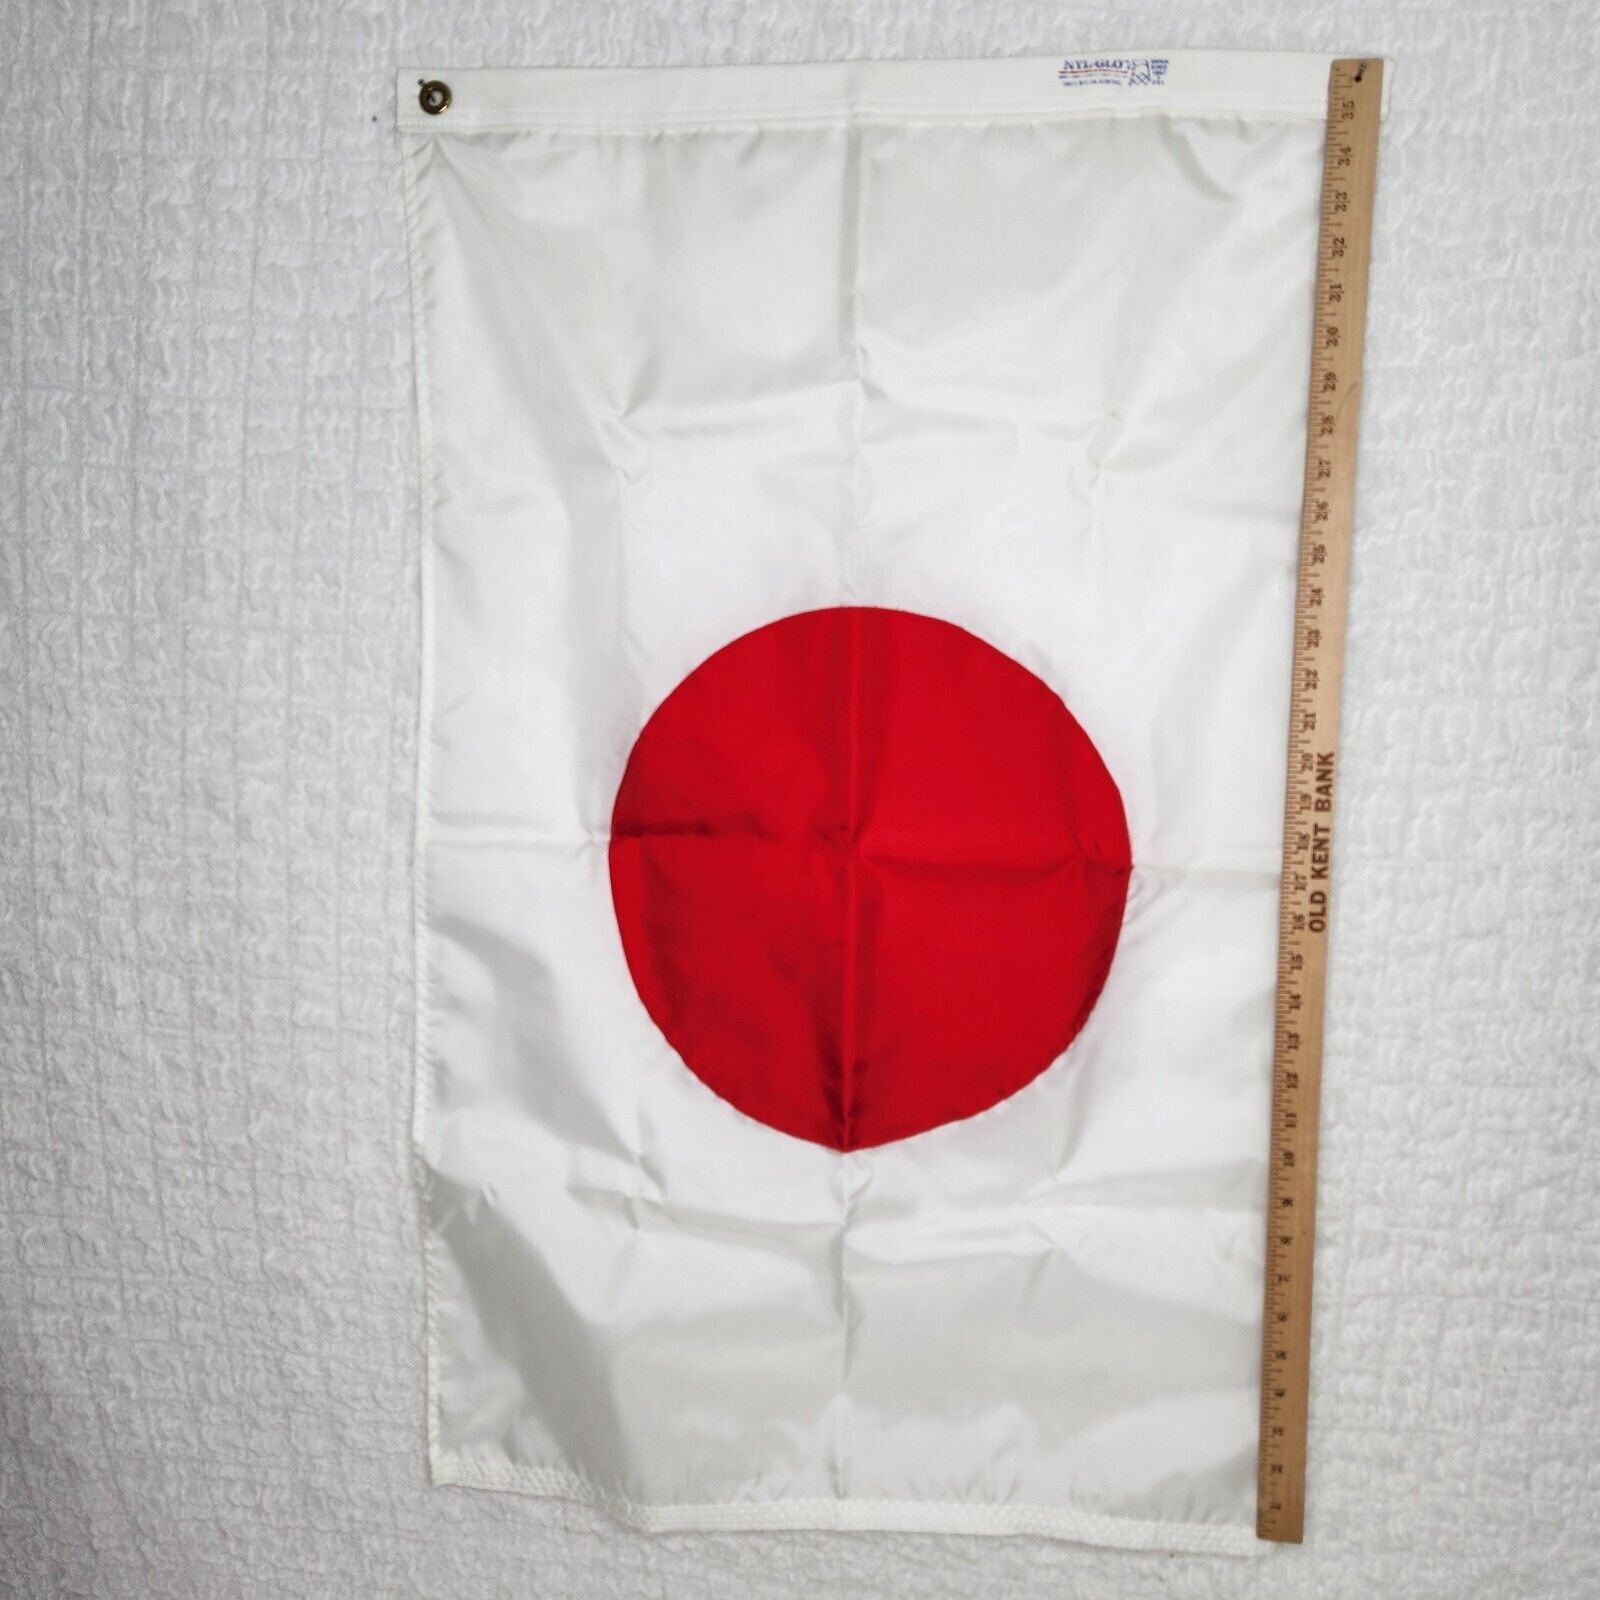 Vintage Japan Flag 2 x 3 Foot Annin USA Flagmakers NYL-GLO Nylon With Grommets